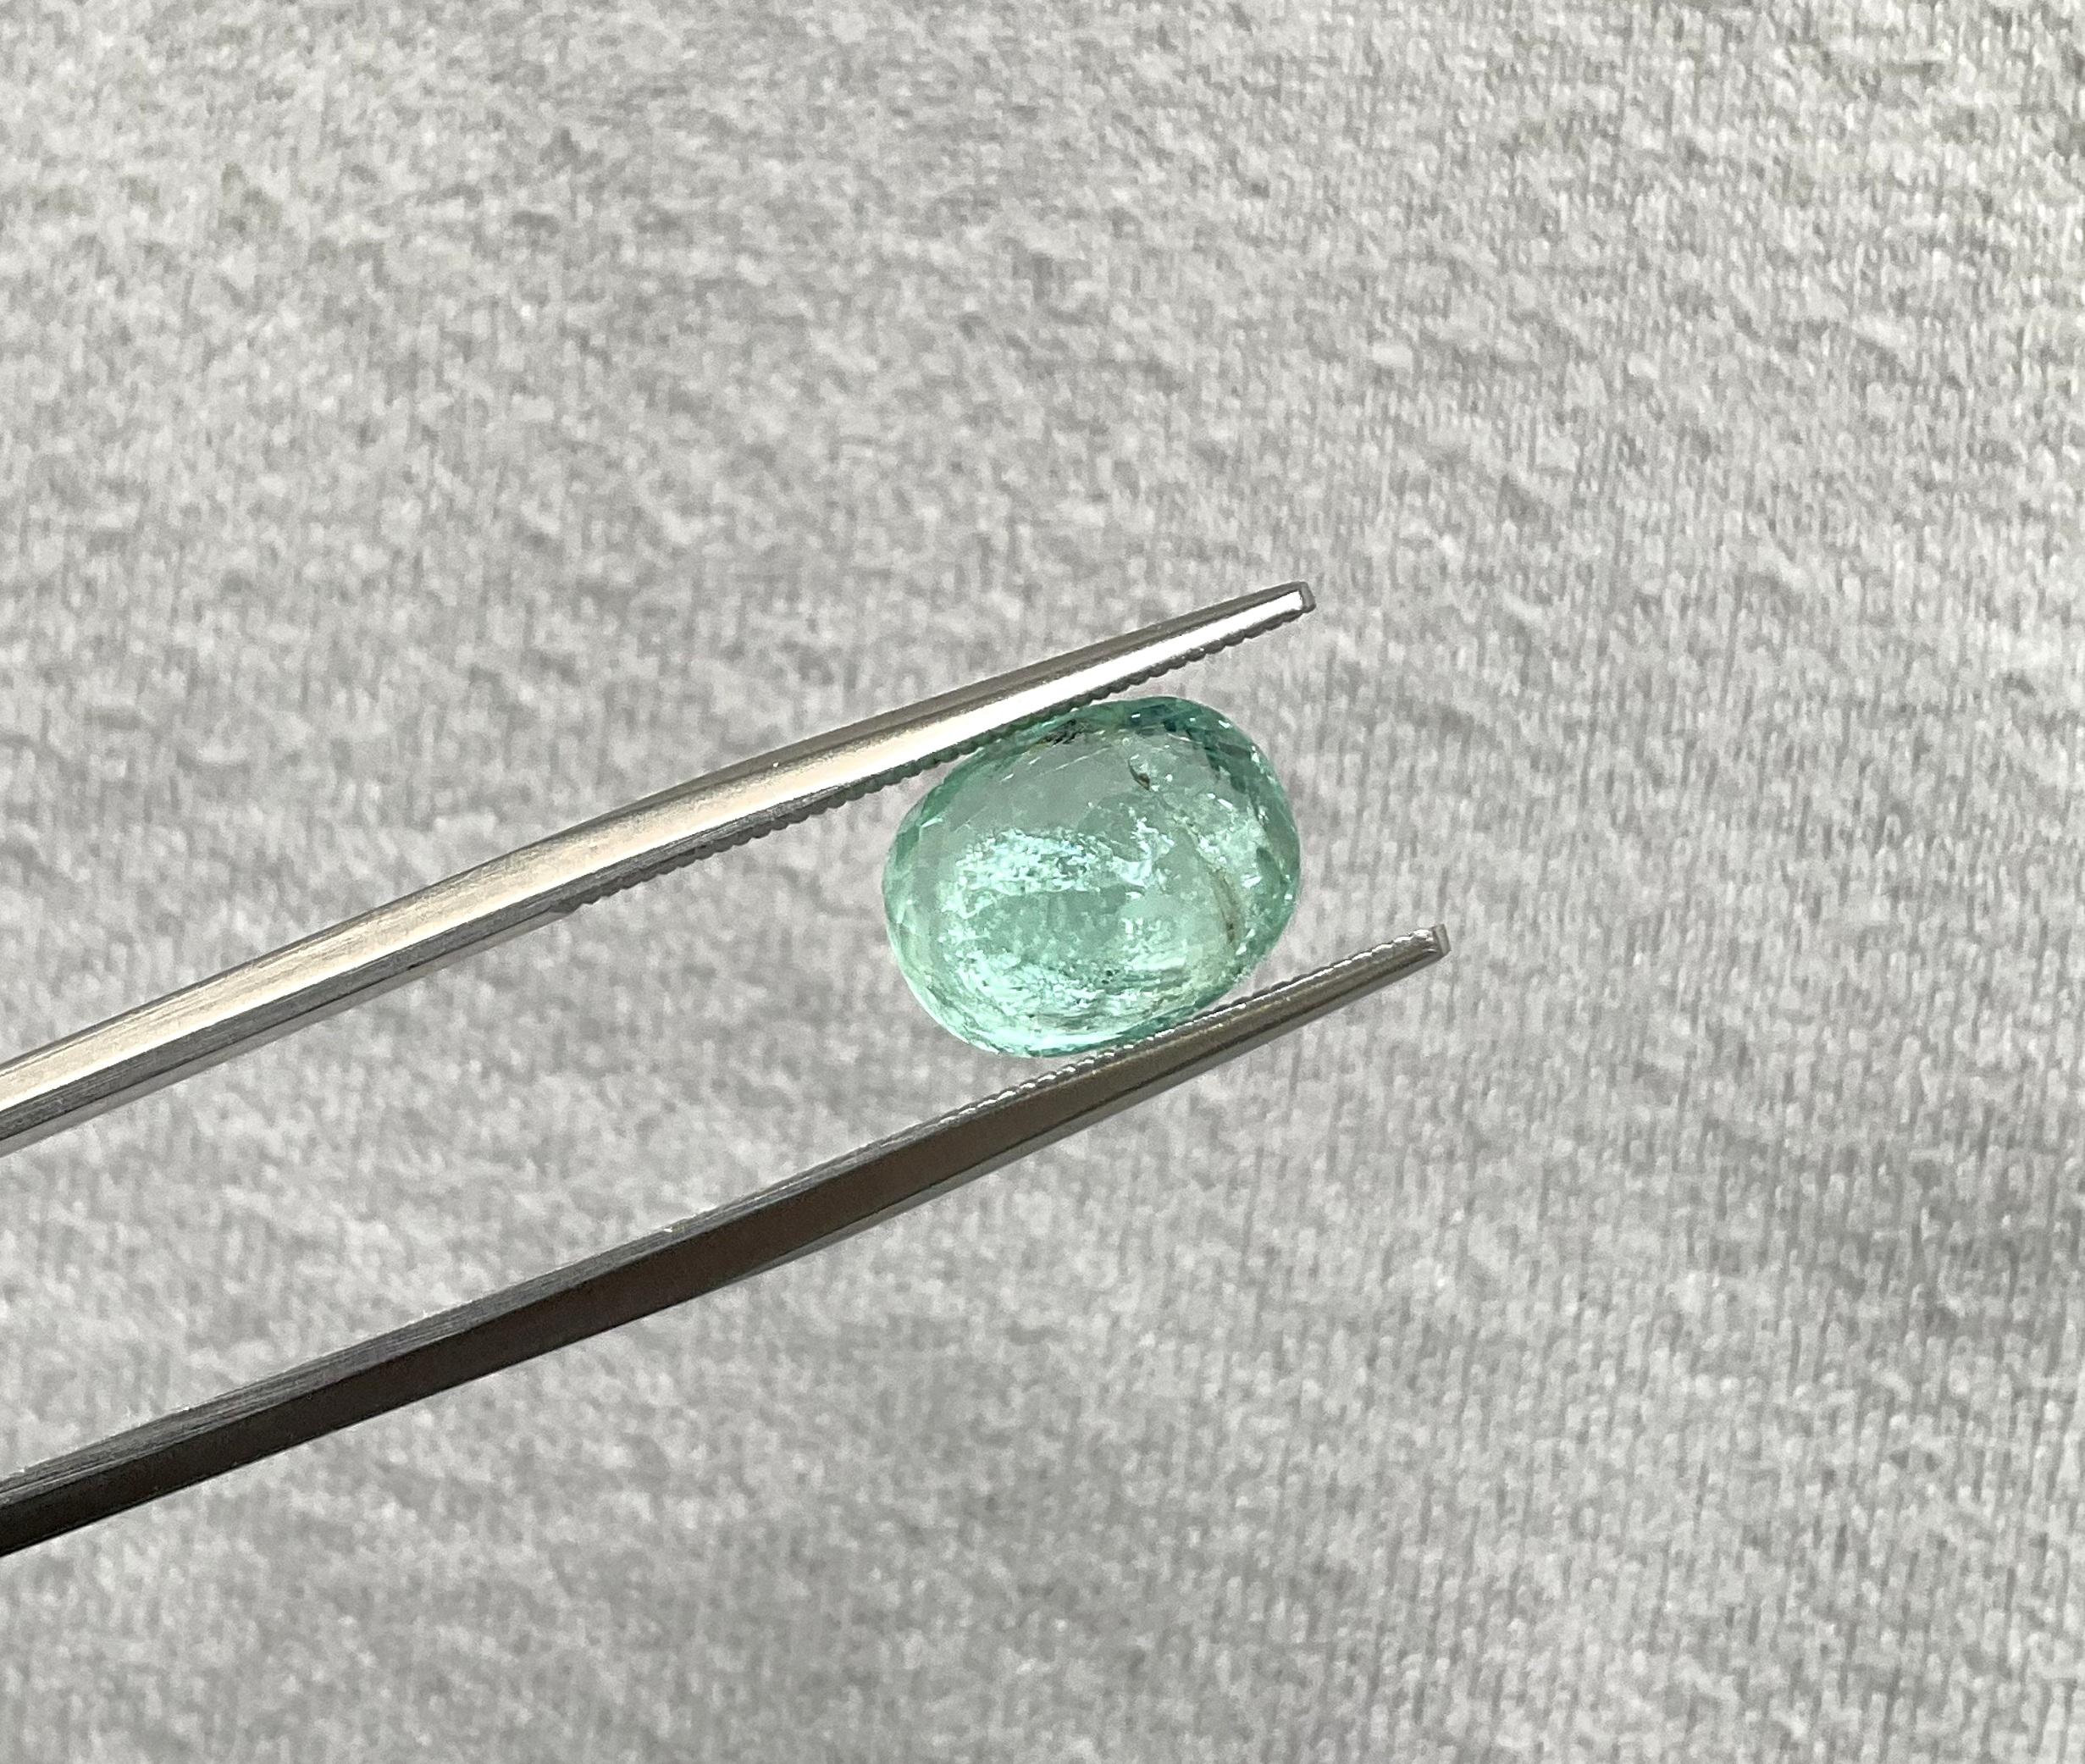 Certified 3.73 Carats Blue Paraiba Tourmaline Oval Cut Stone for Fine Jewelry For Sale 1